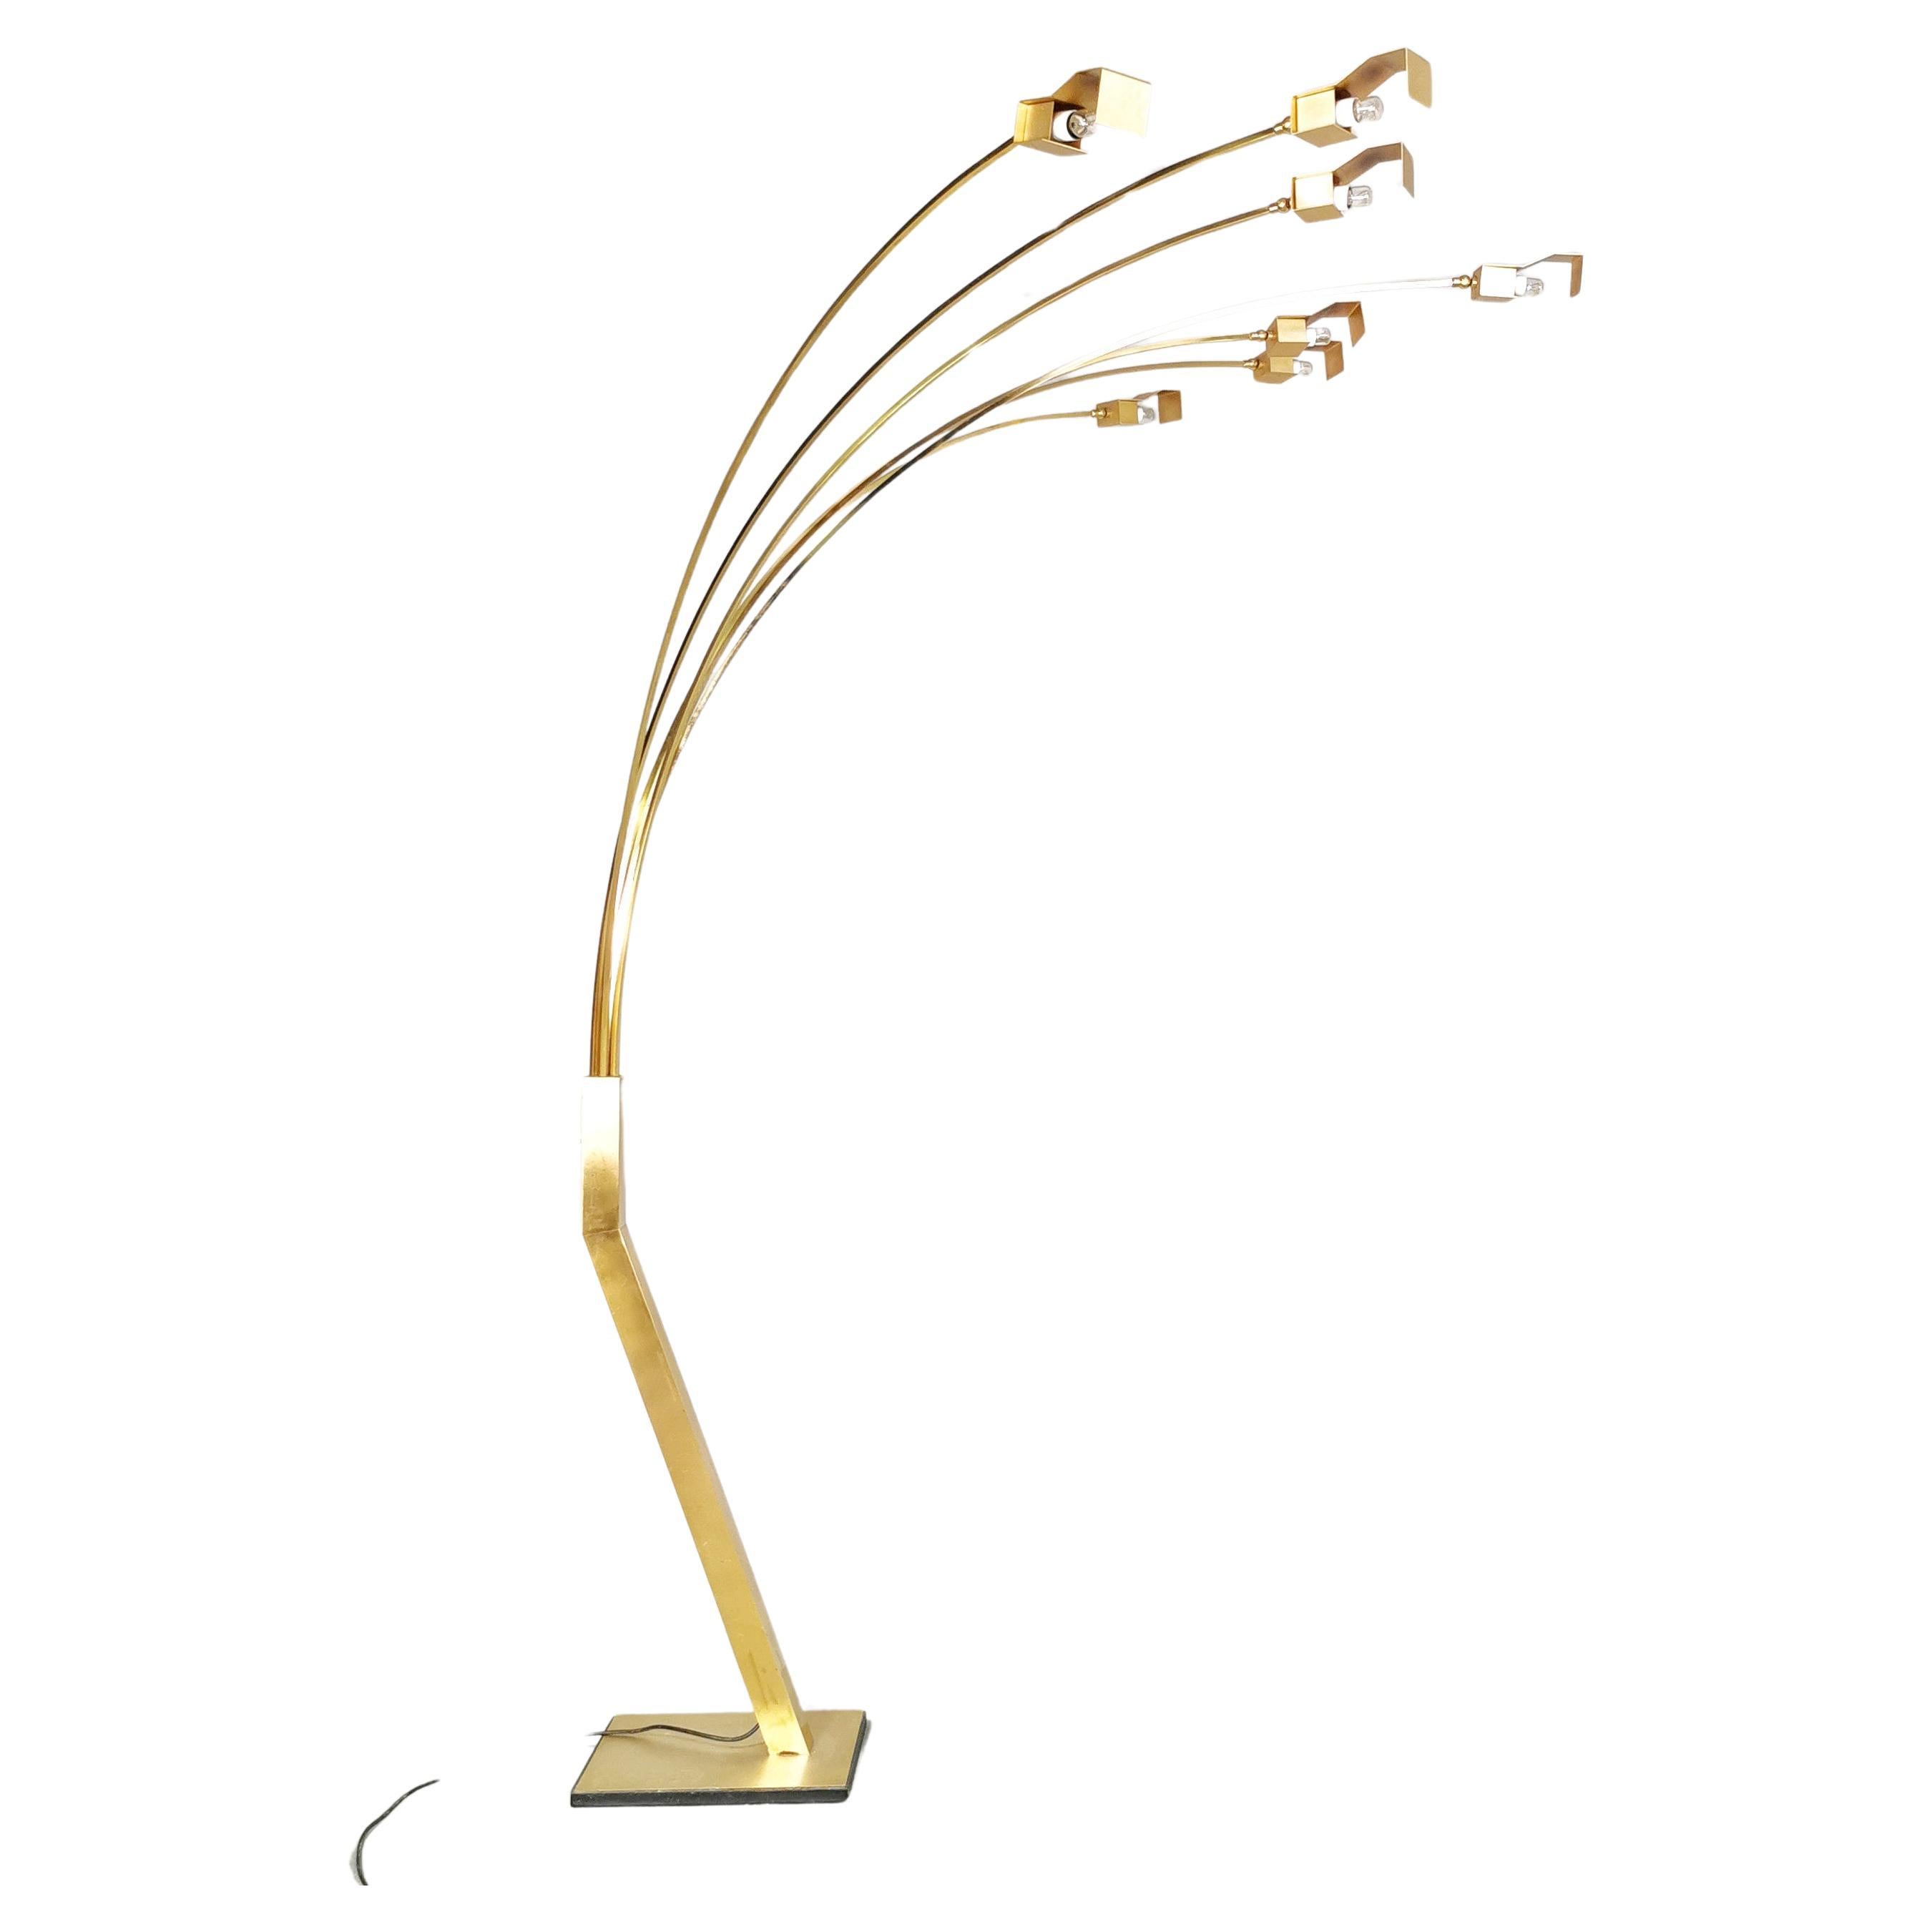 Large floor lamp n brass with sculptural base with as many as 7 arched stems and golden metal diffusers. 
We found no attribution for a designer or manufacturer of this rare, high-impact lamp version in a living room or showroom
condition is very